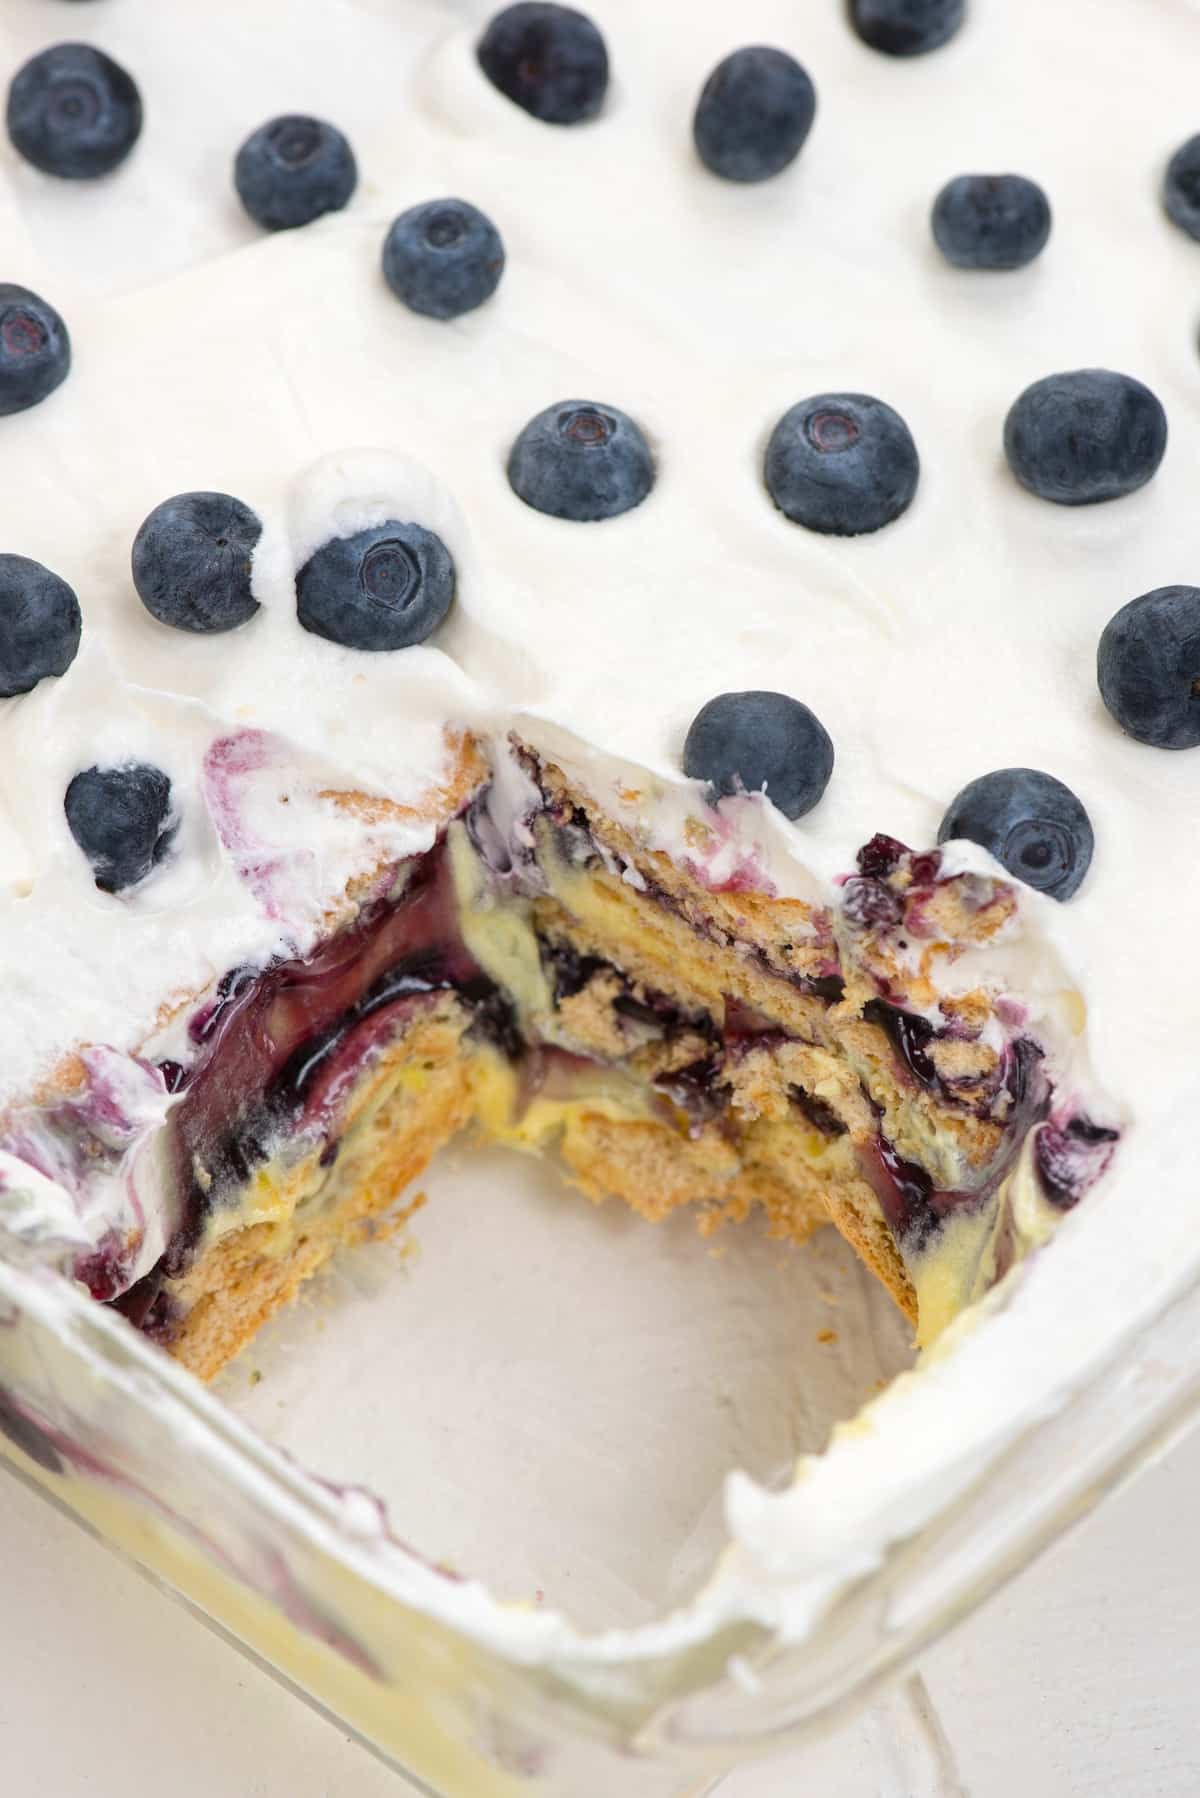 cake with blueberries and lemons on top.